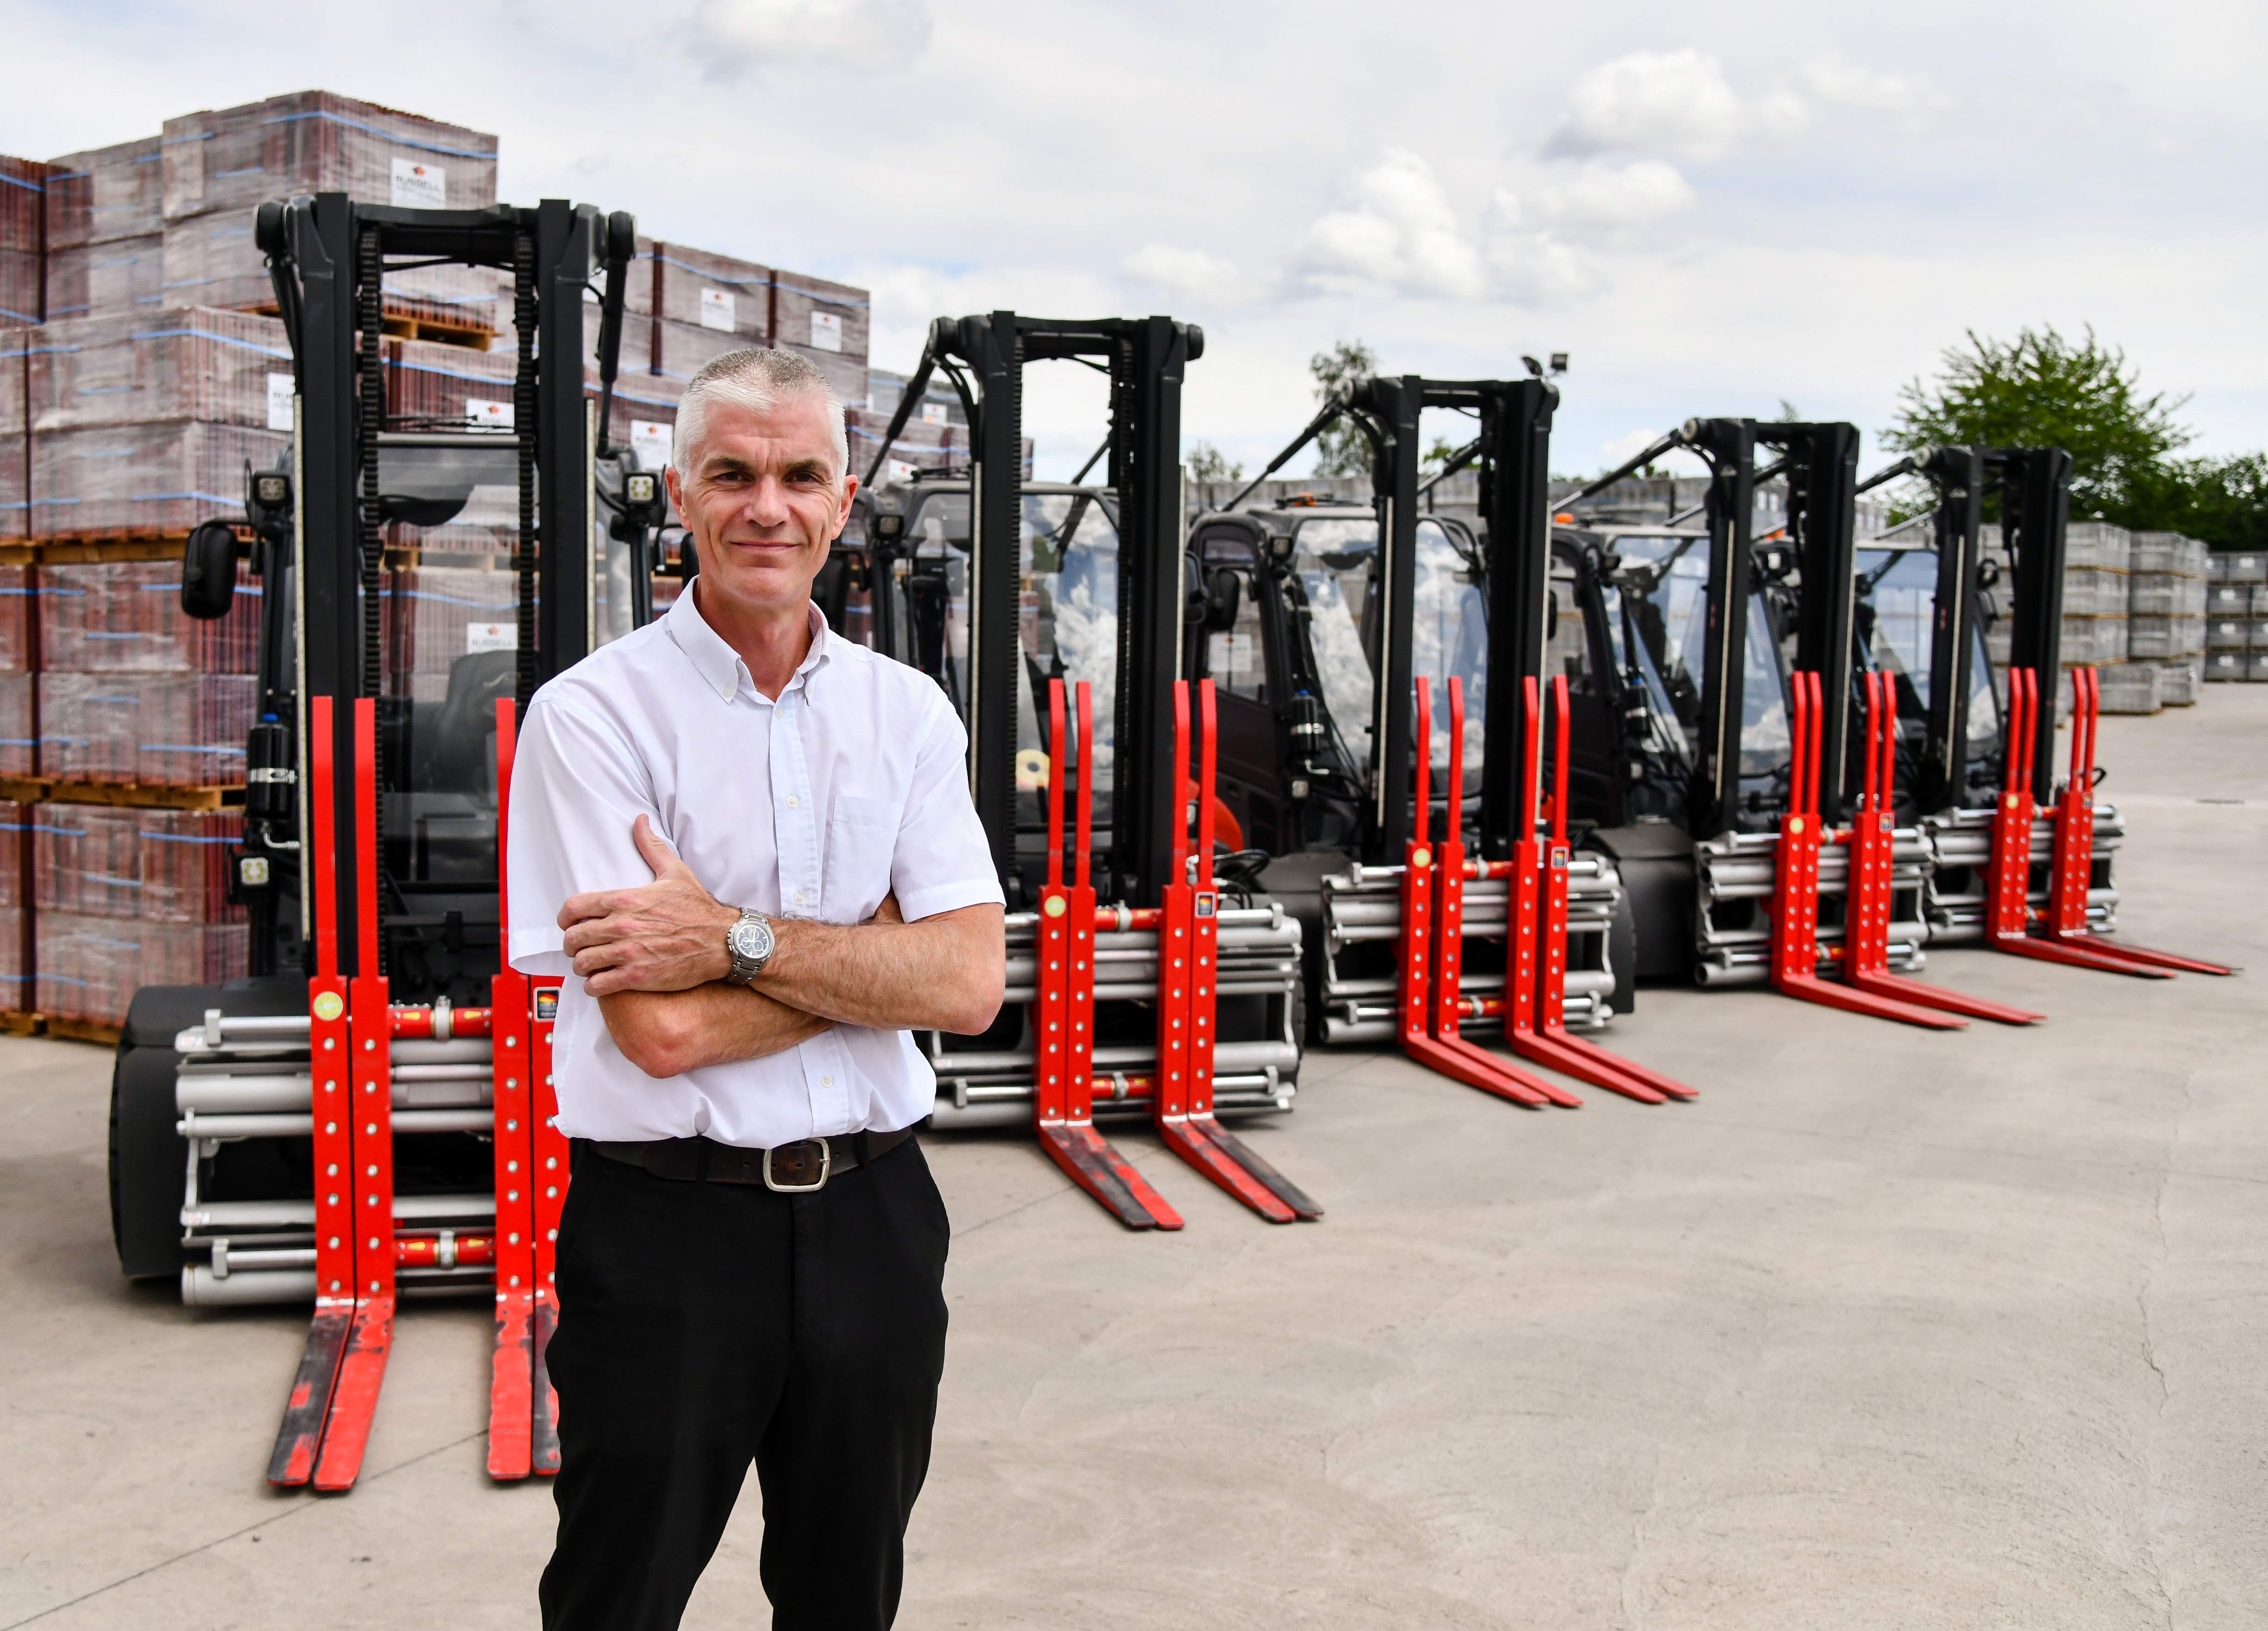 Russell Roof Tiles takes delivery of new electric forklifts